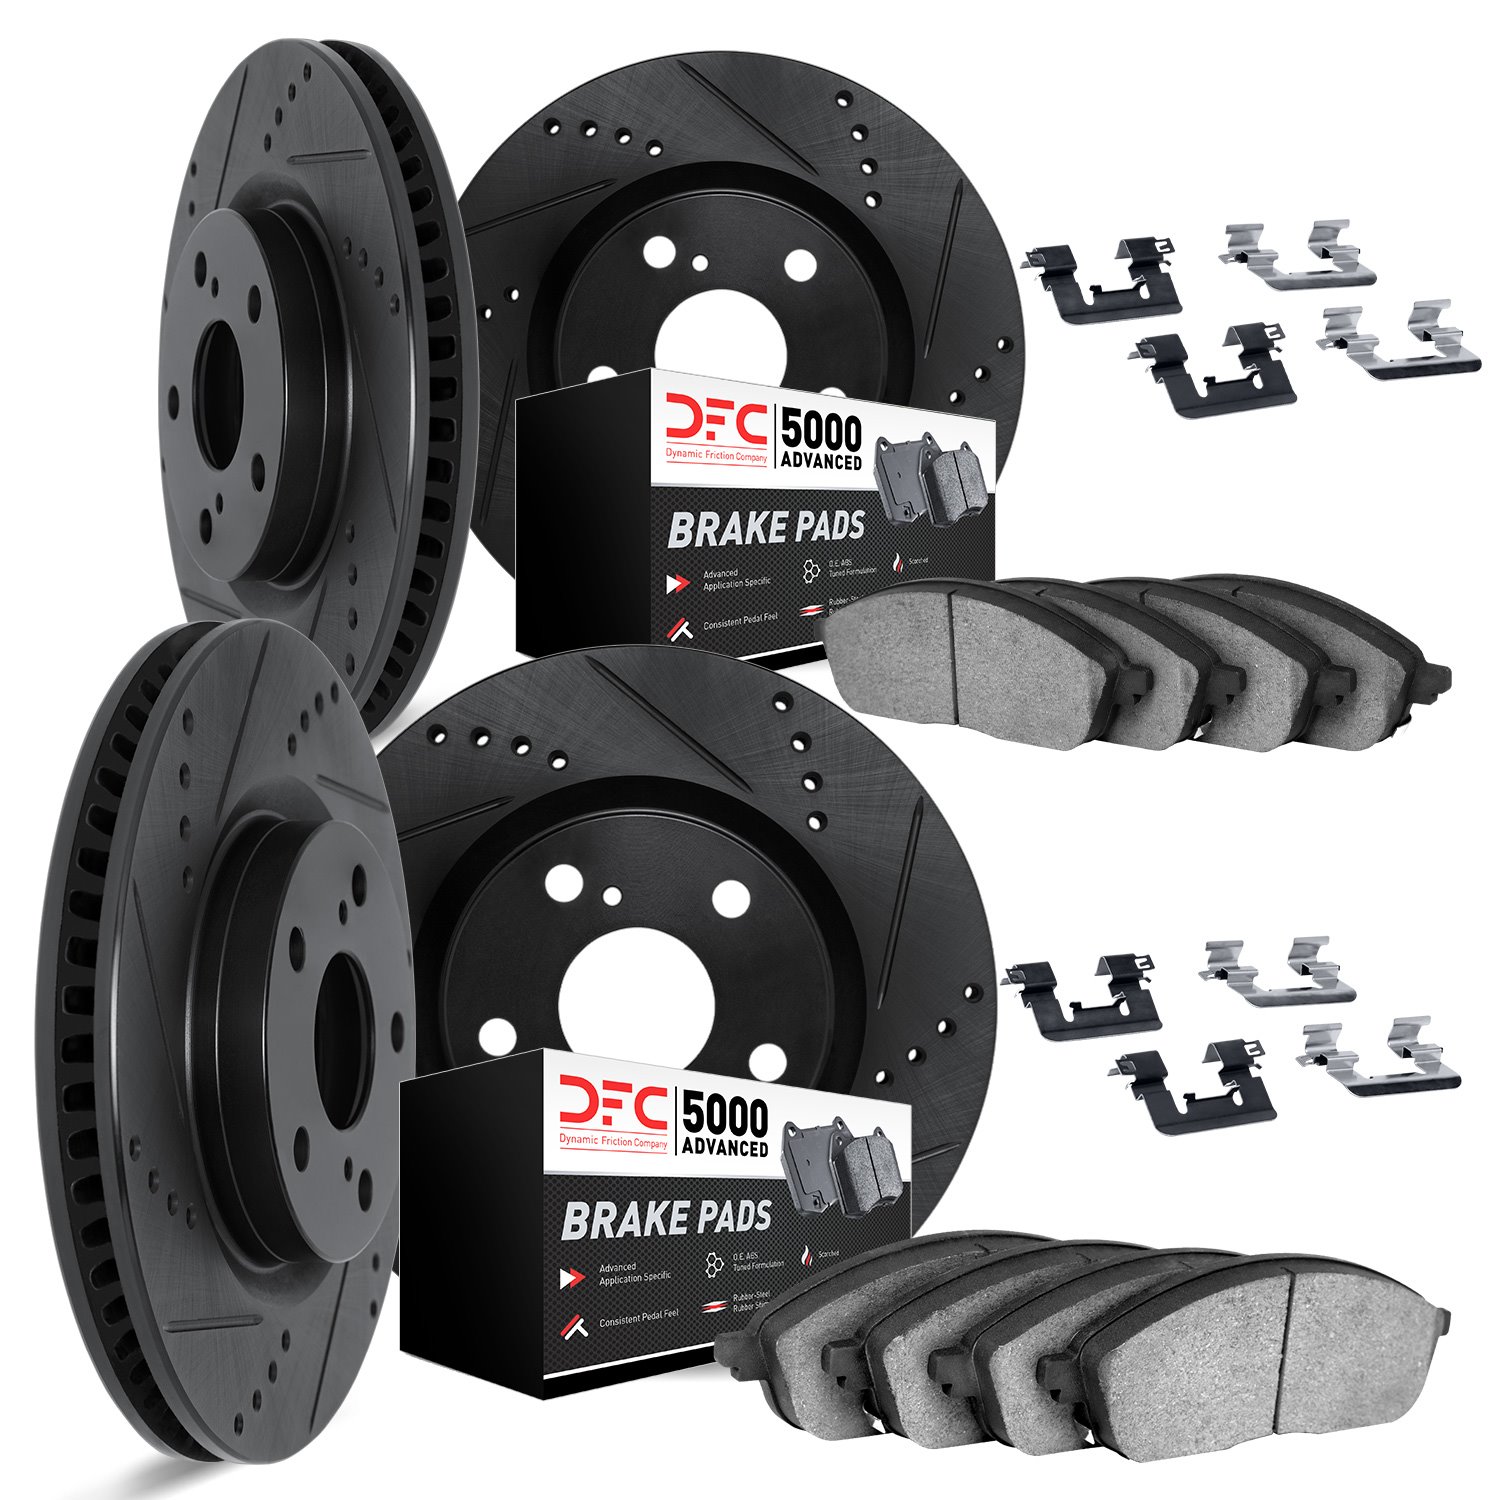 8514-31002 Drilled/Slotted Brake Rotors w/5000 Advanced Brake Pads Kit & Hardware [Black], 1995-2001 BMW, Position: Front and Re